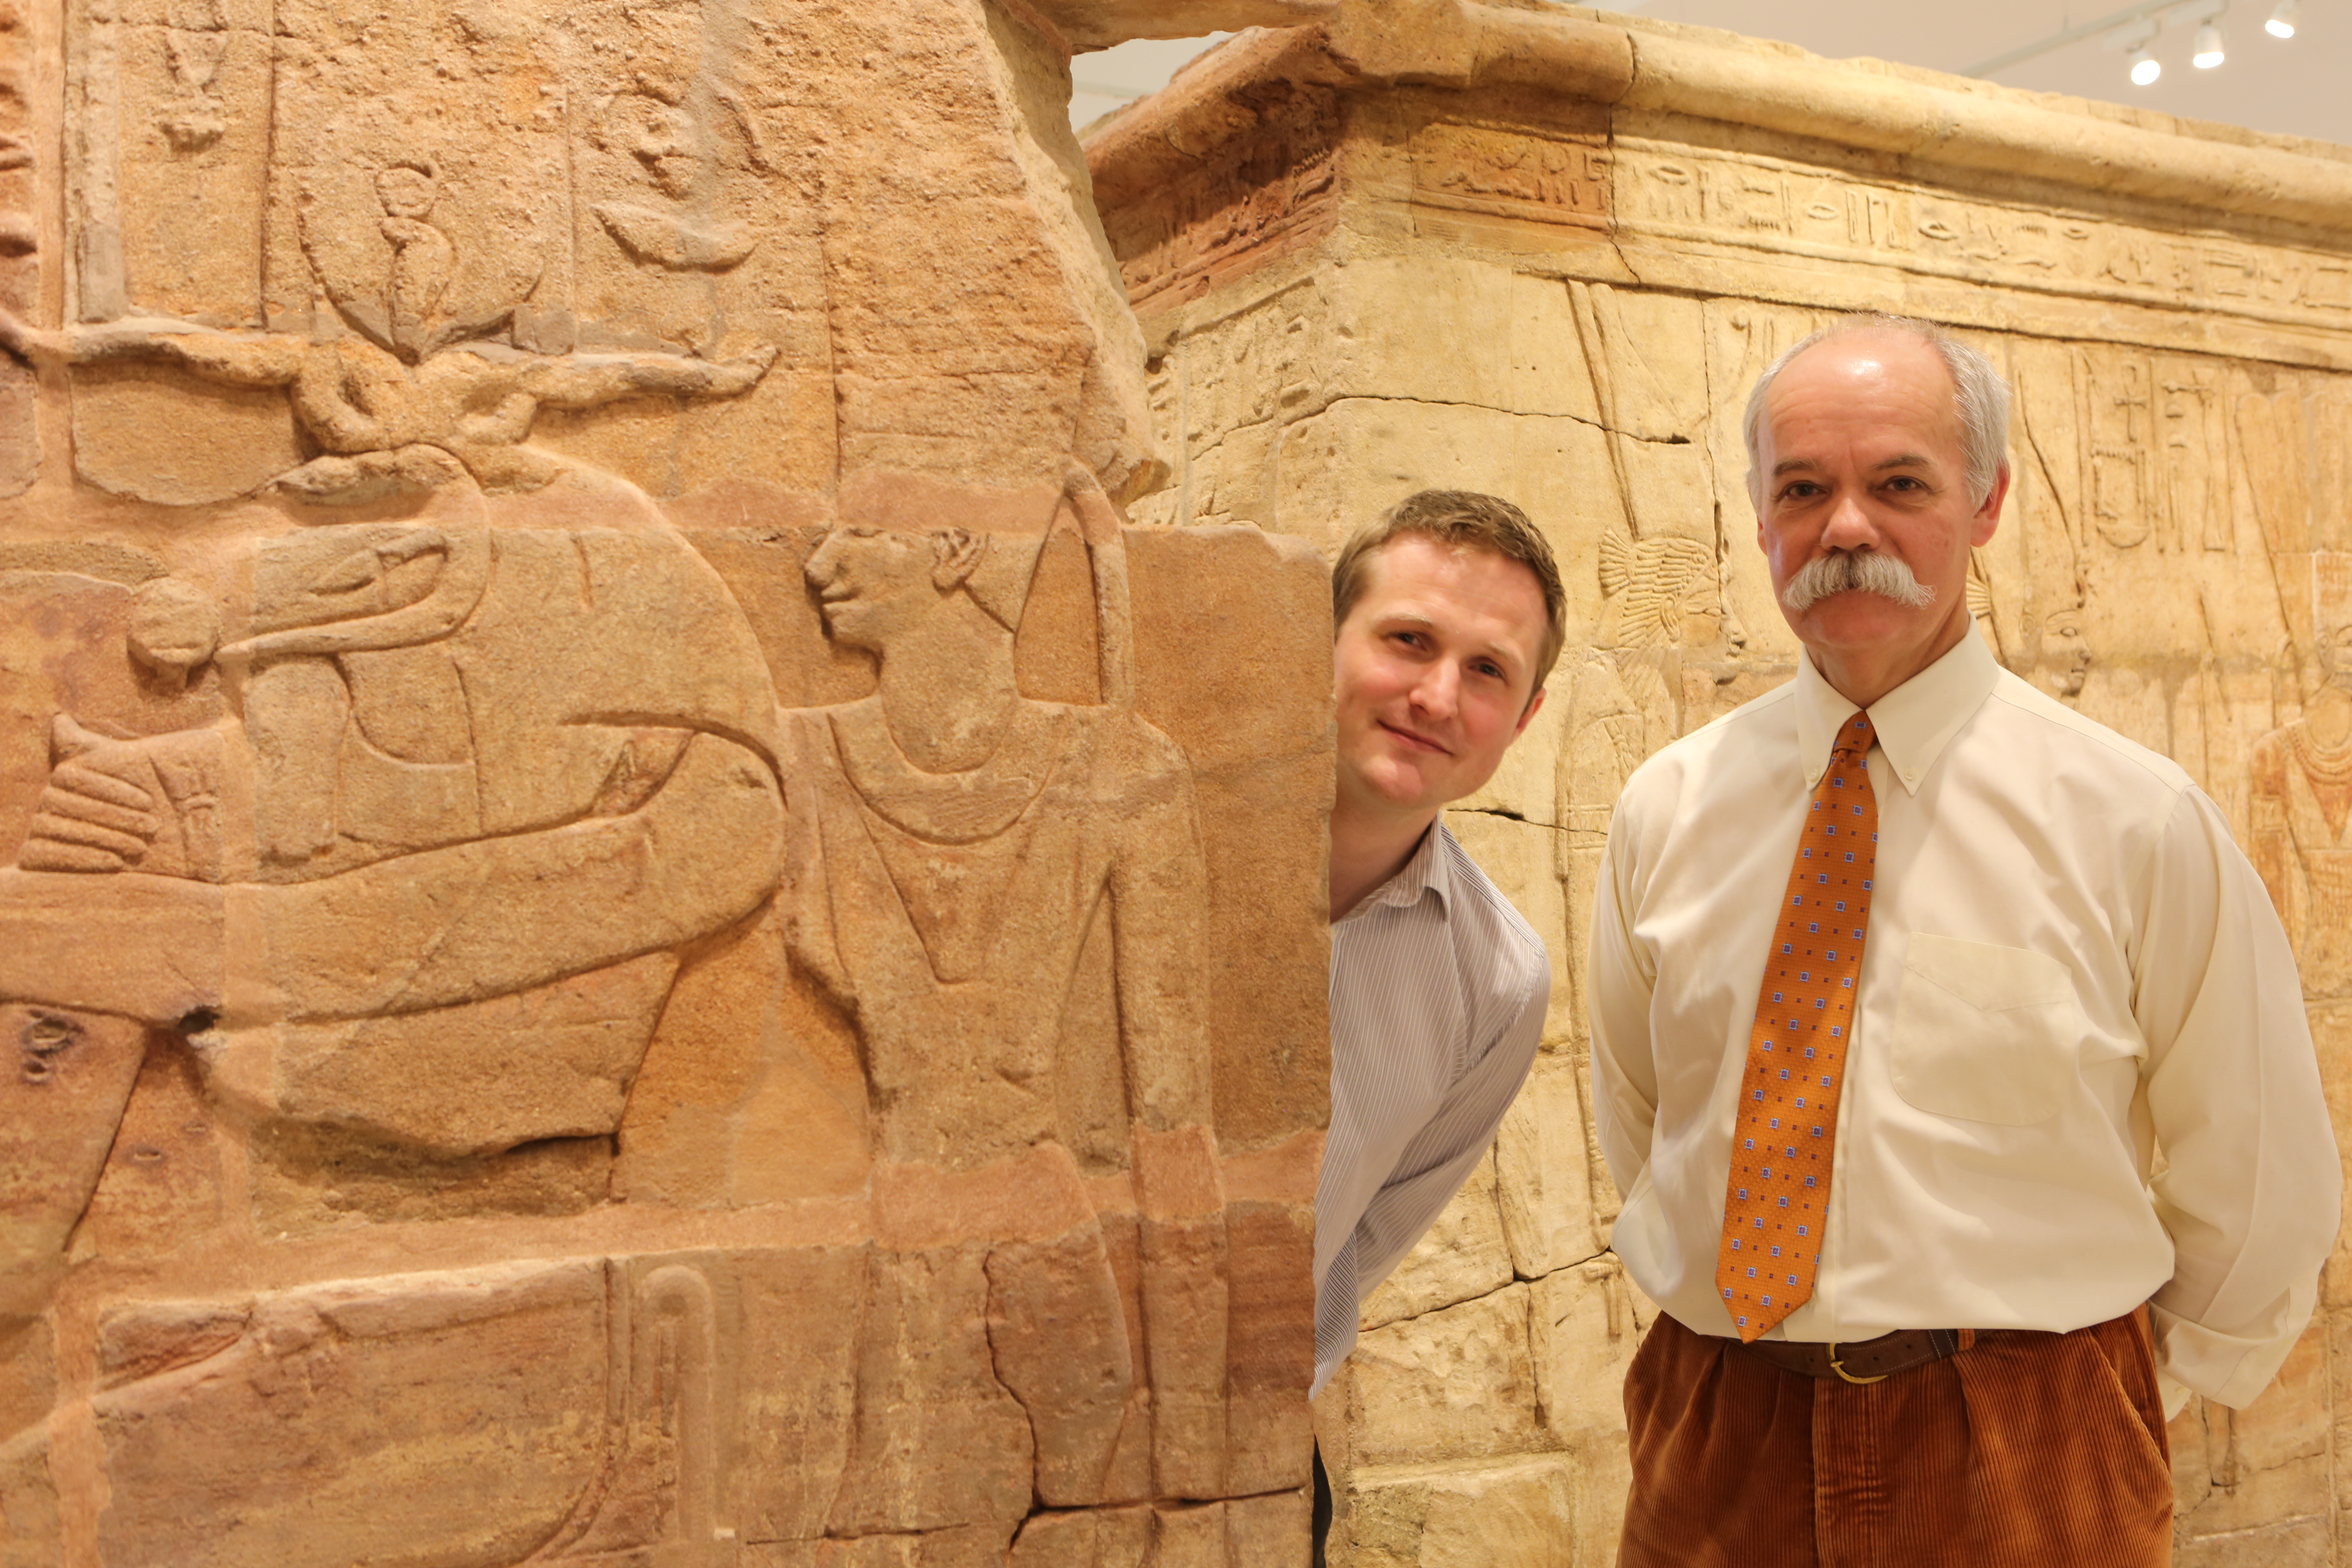 Two persons standing next to an archaeology exhibit